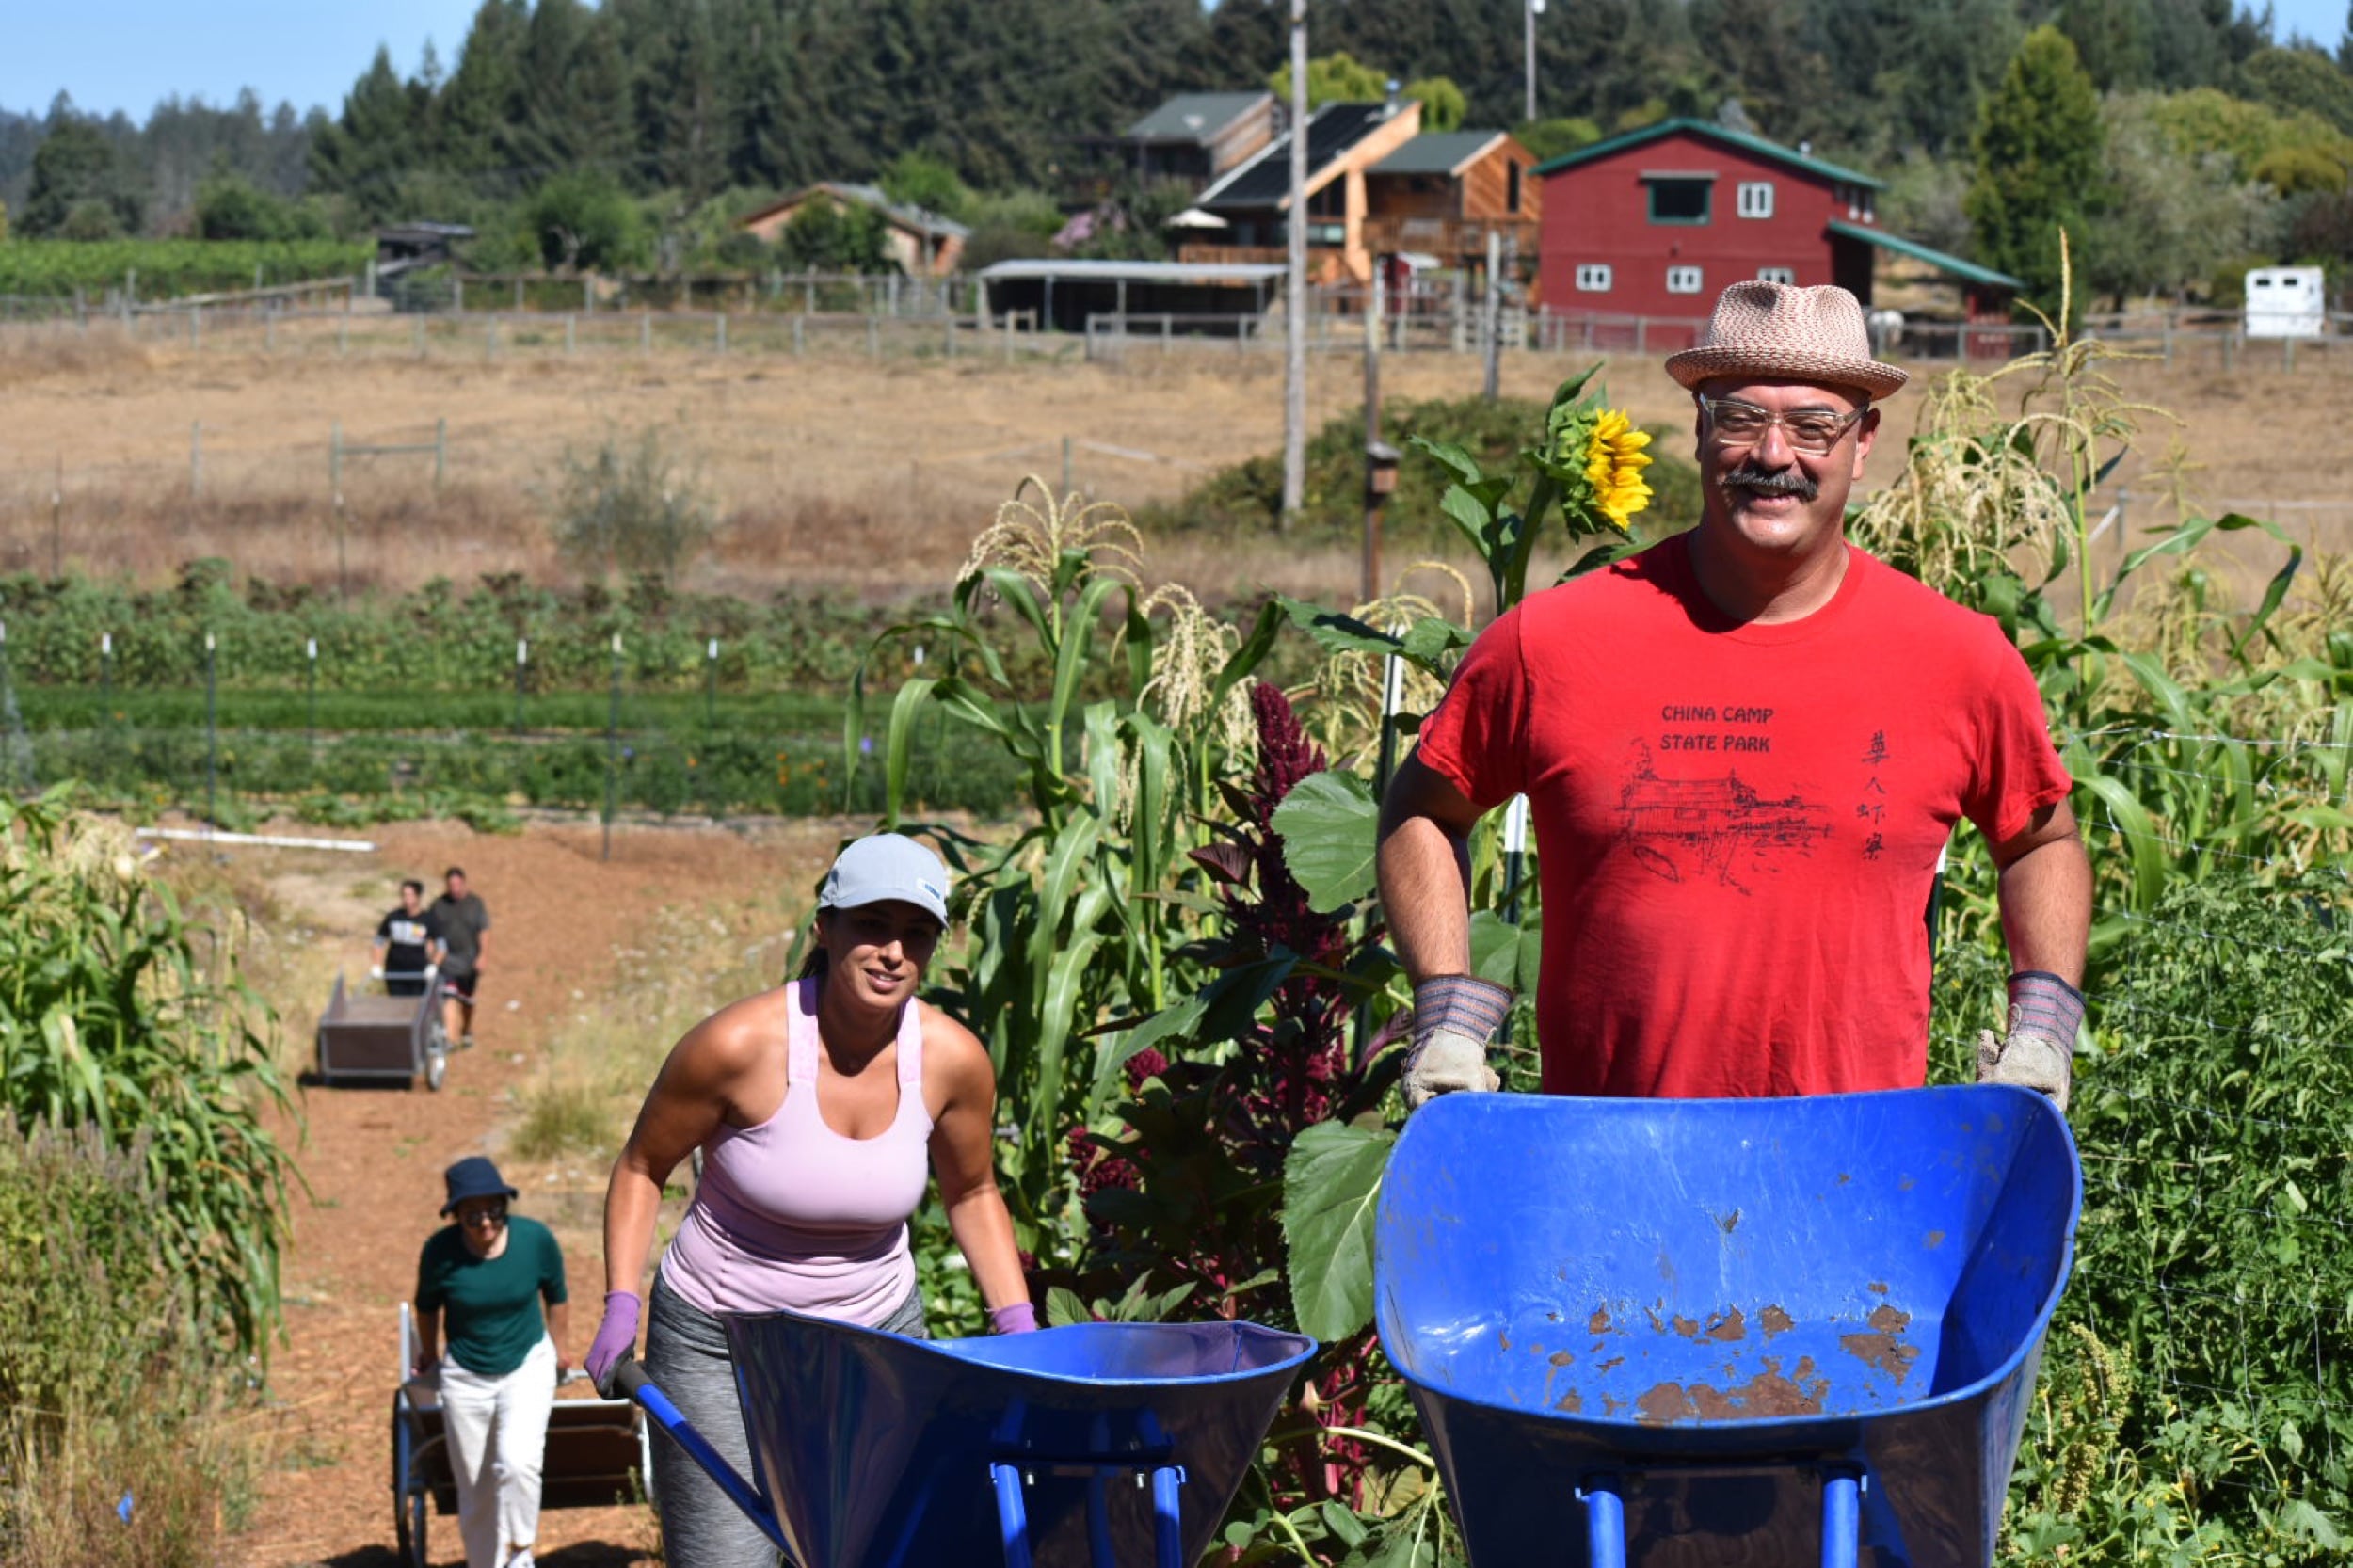 Tides employees volunteering at Heron Shadow farm. The two people in the foreground, a man and a woman, with medium-tone skin and dark hair are wearing hats and pushing blue wheelbarrows up a hill.